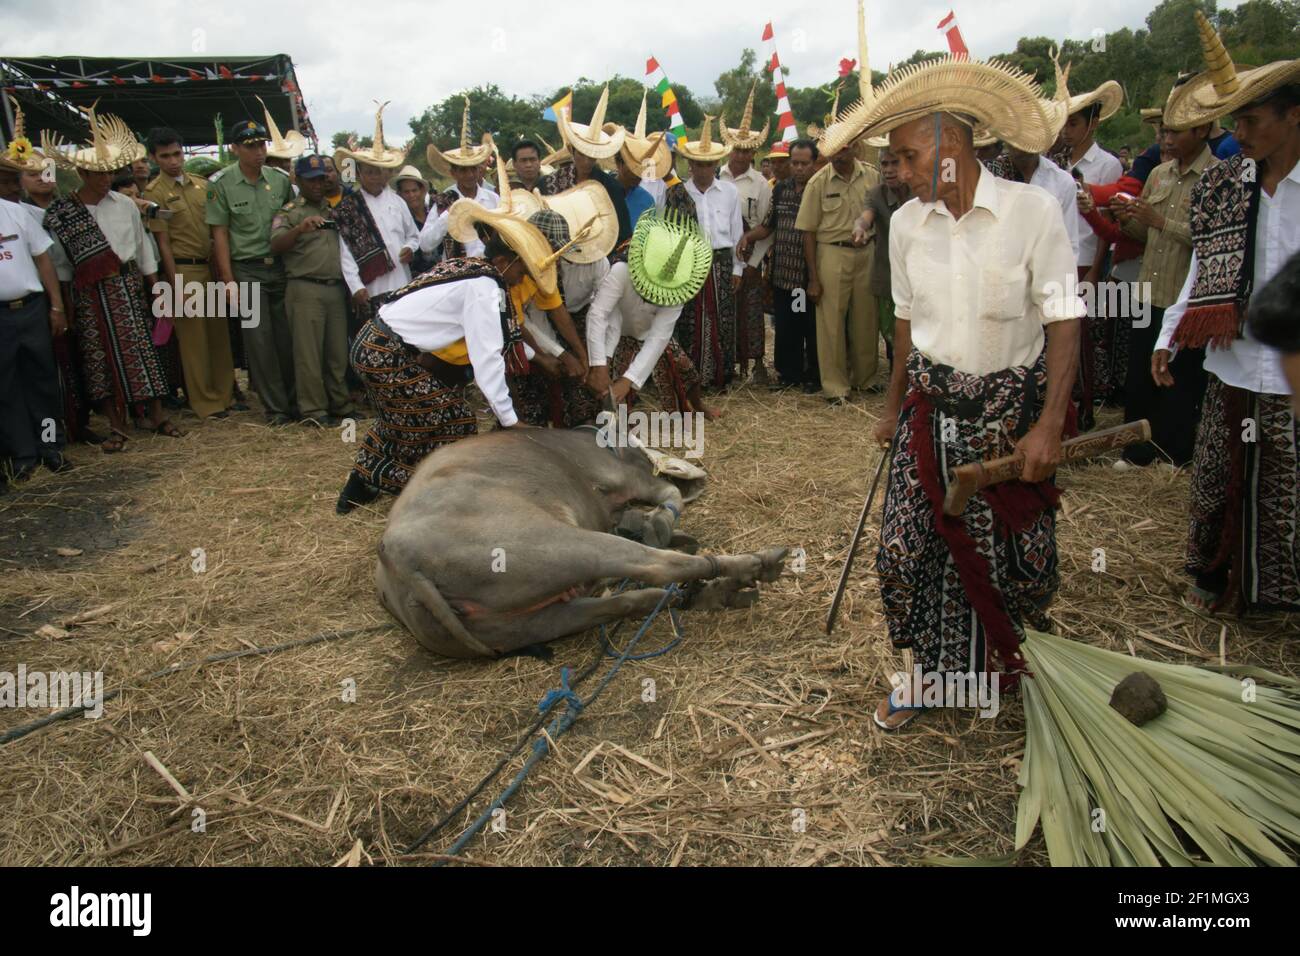 Rote Island, Indonesia. July 16, 2009. Elders of different clans slaughtering a water buffalo, a ritual to declare that they have reached a consensus to save the Rote Island's snake-necked turtle (Chelodina mccordi) from extinction, during a ceremonial event to release the turtles bred in captivity back to a suitable habitat. Lake Peto, Maubesi village, Rote Ndao regency, East Nusa Tenggara, Indonesia. Stock Photo